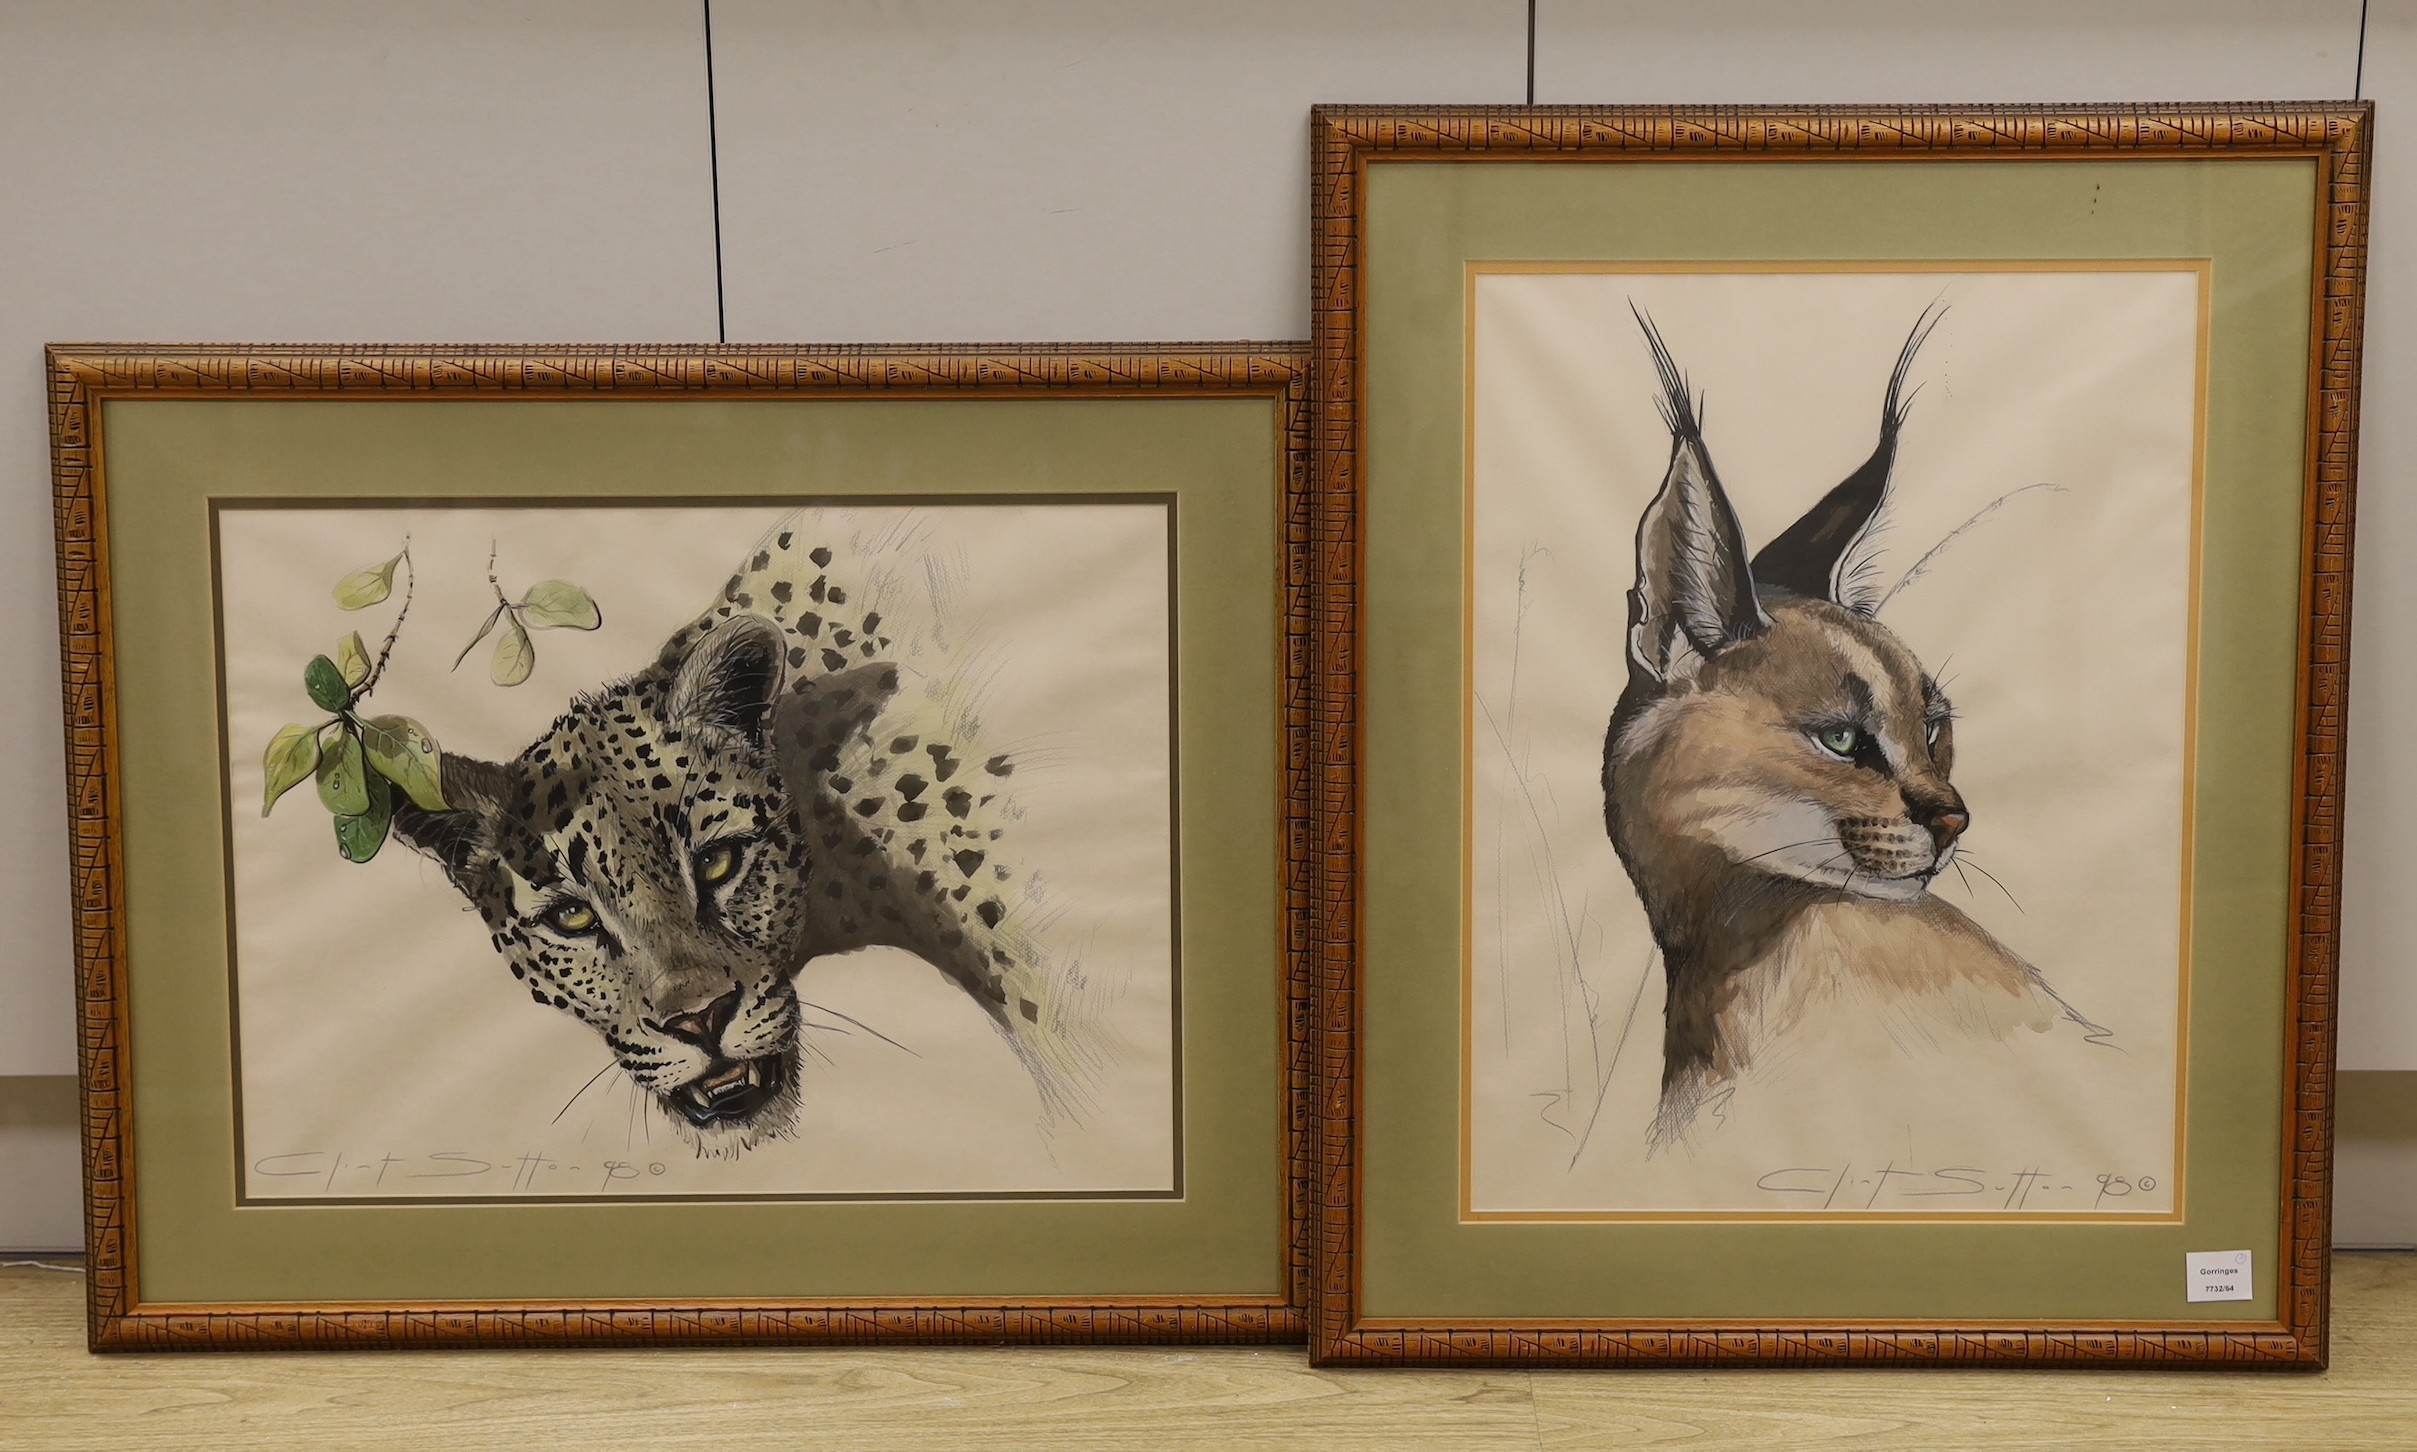 Clint Sutton, contemporary, two watercolours, Jaguar and Lynx, both signed and dated ‘90, largest 59 x 44cm